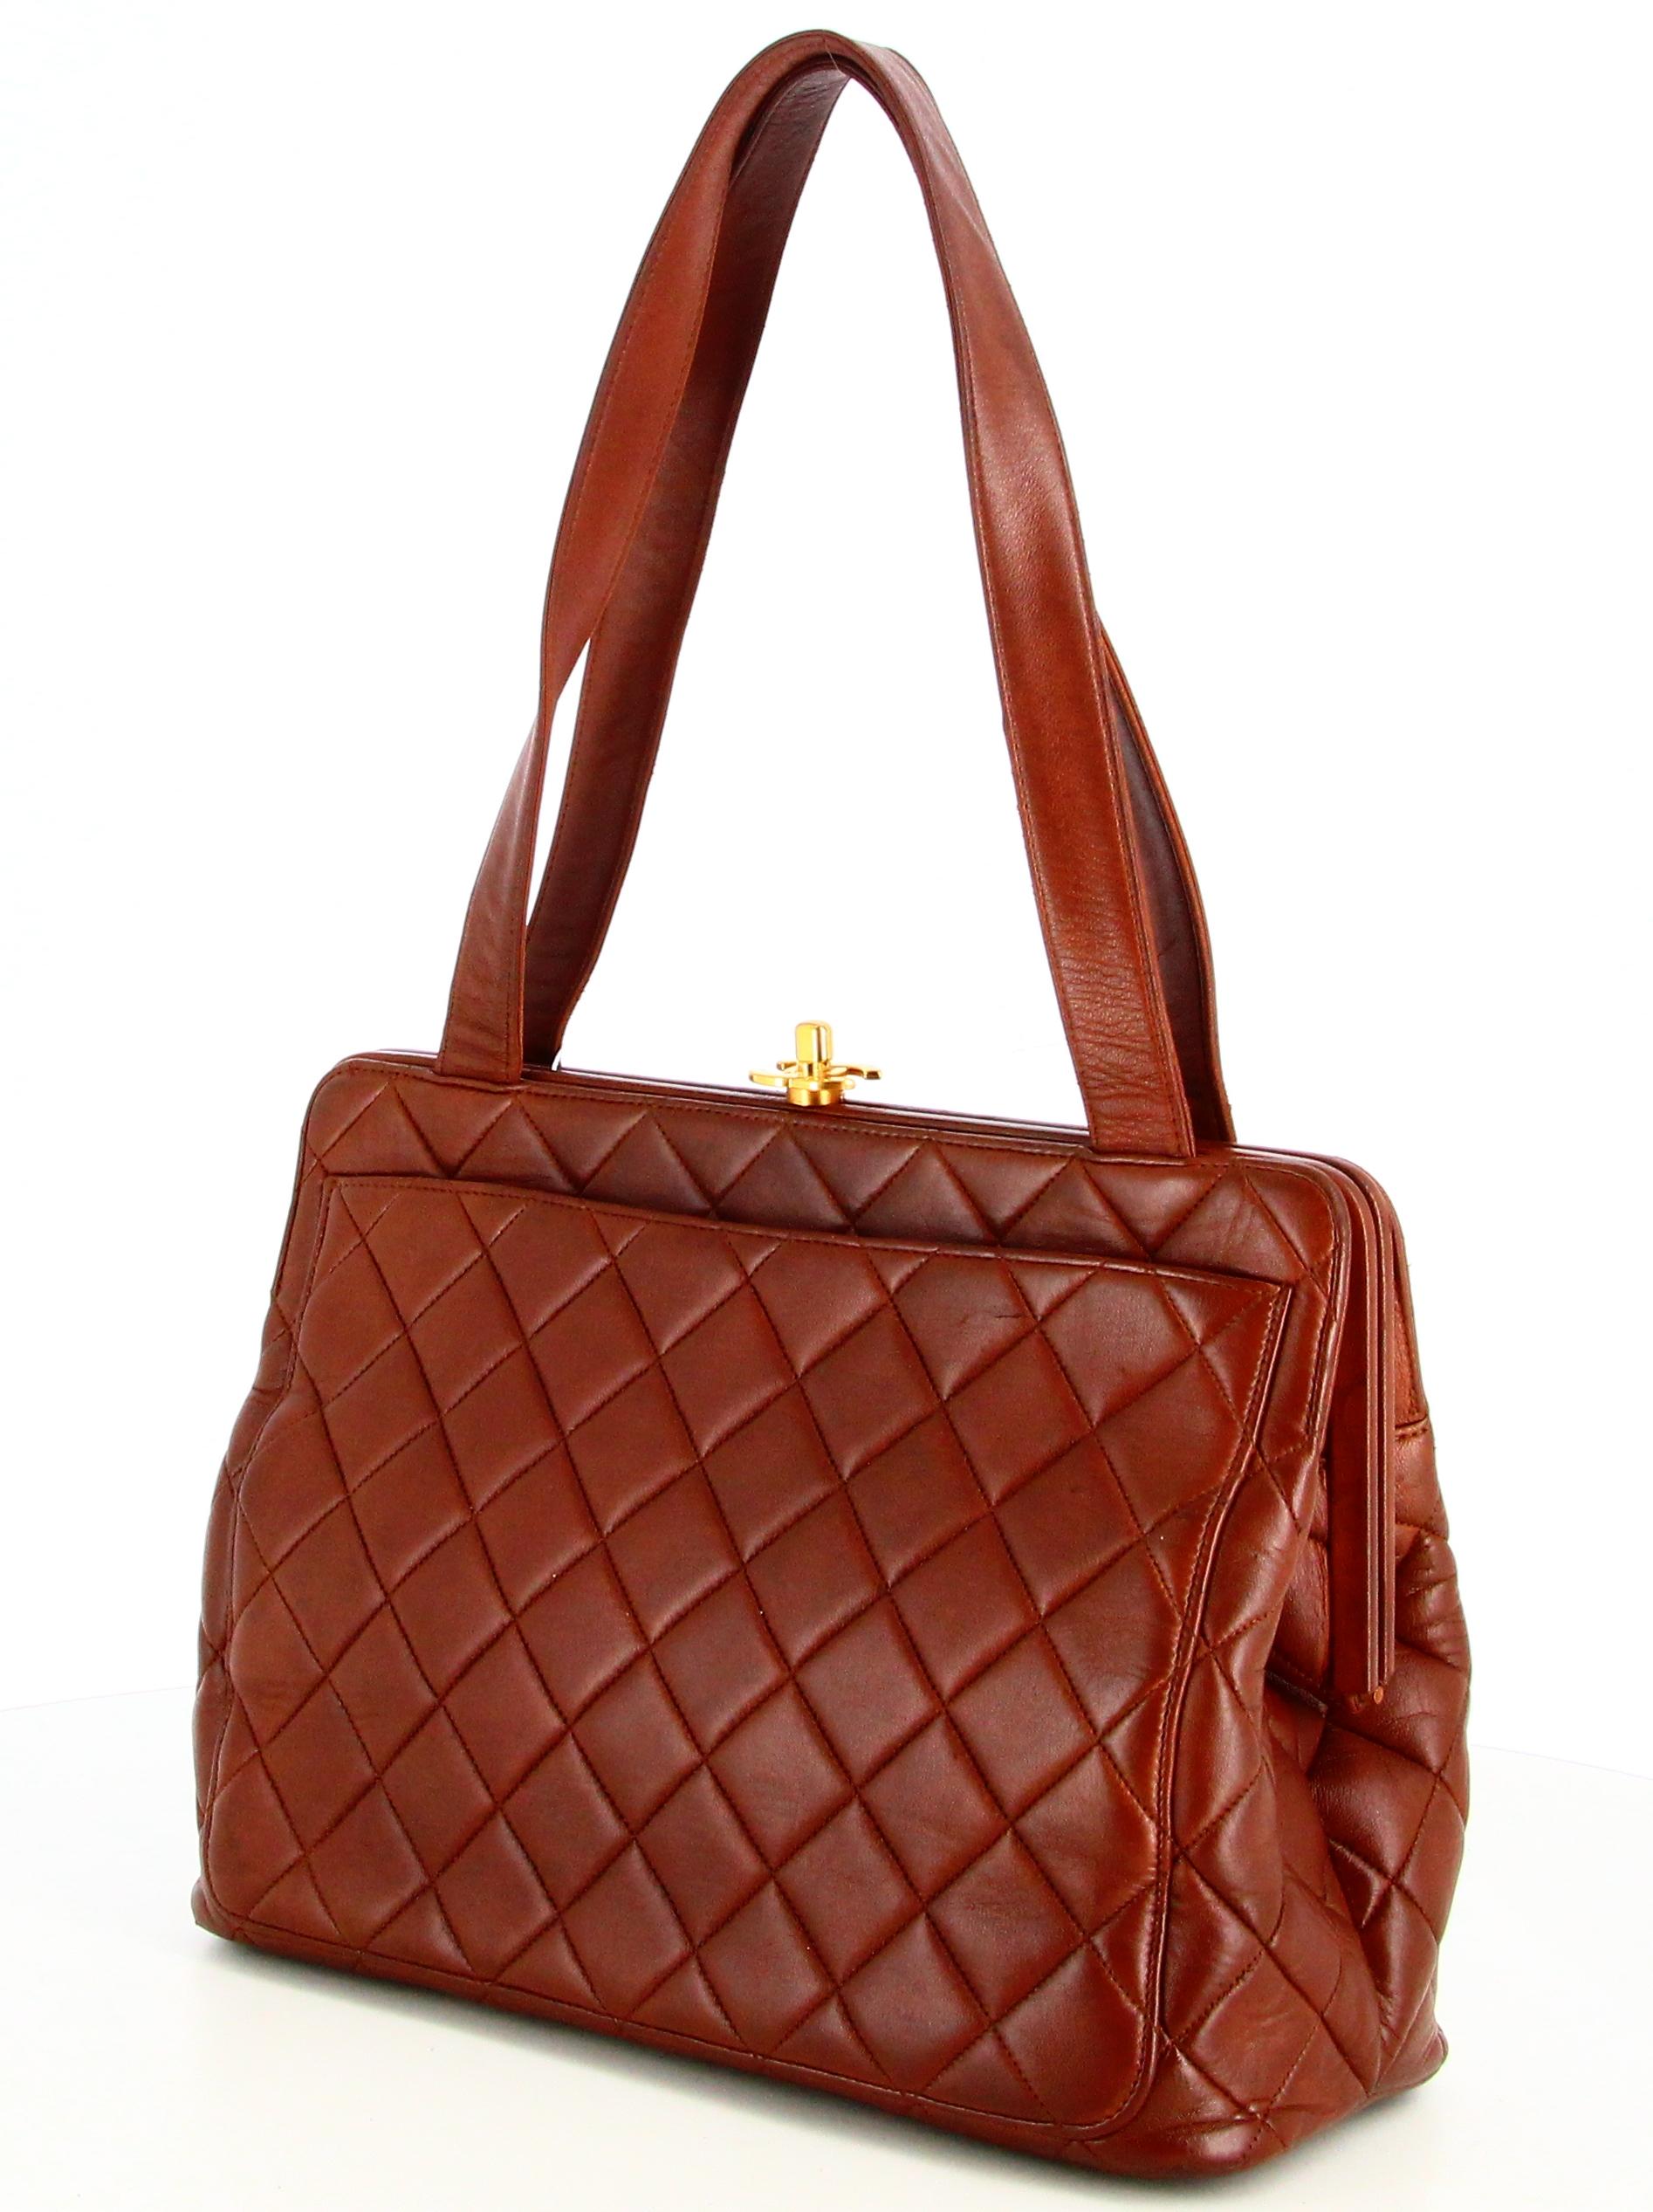 1996 Chanel Handbag Brown Quilted leather In Good Condition For Sale In PARIS, FR